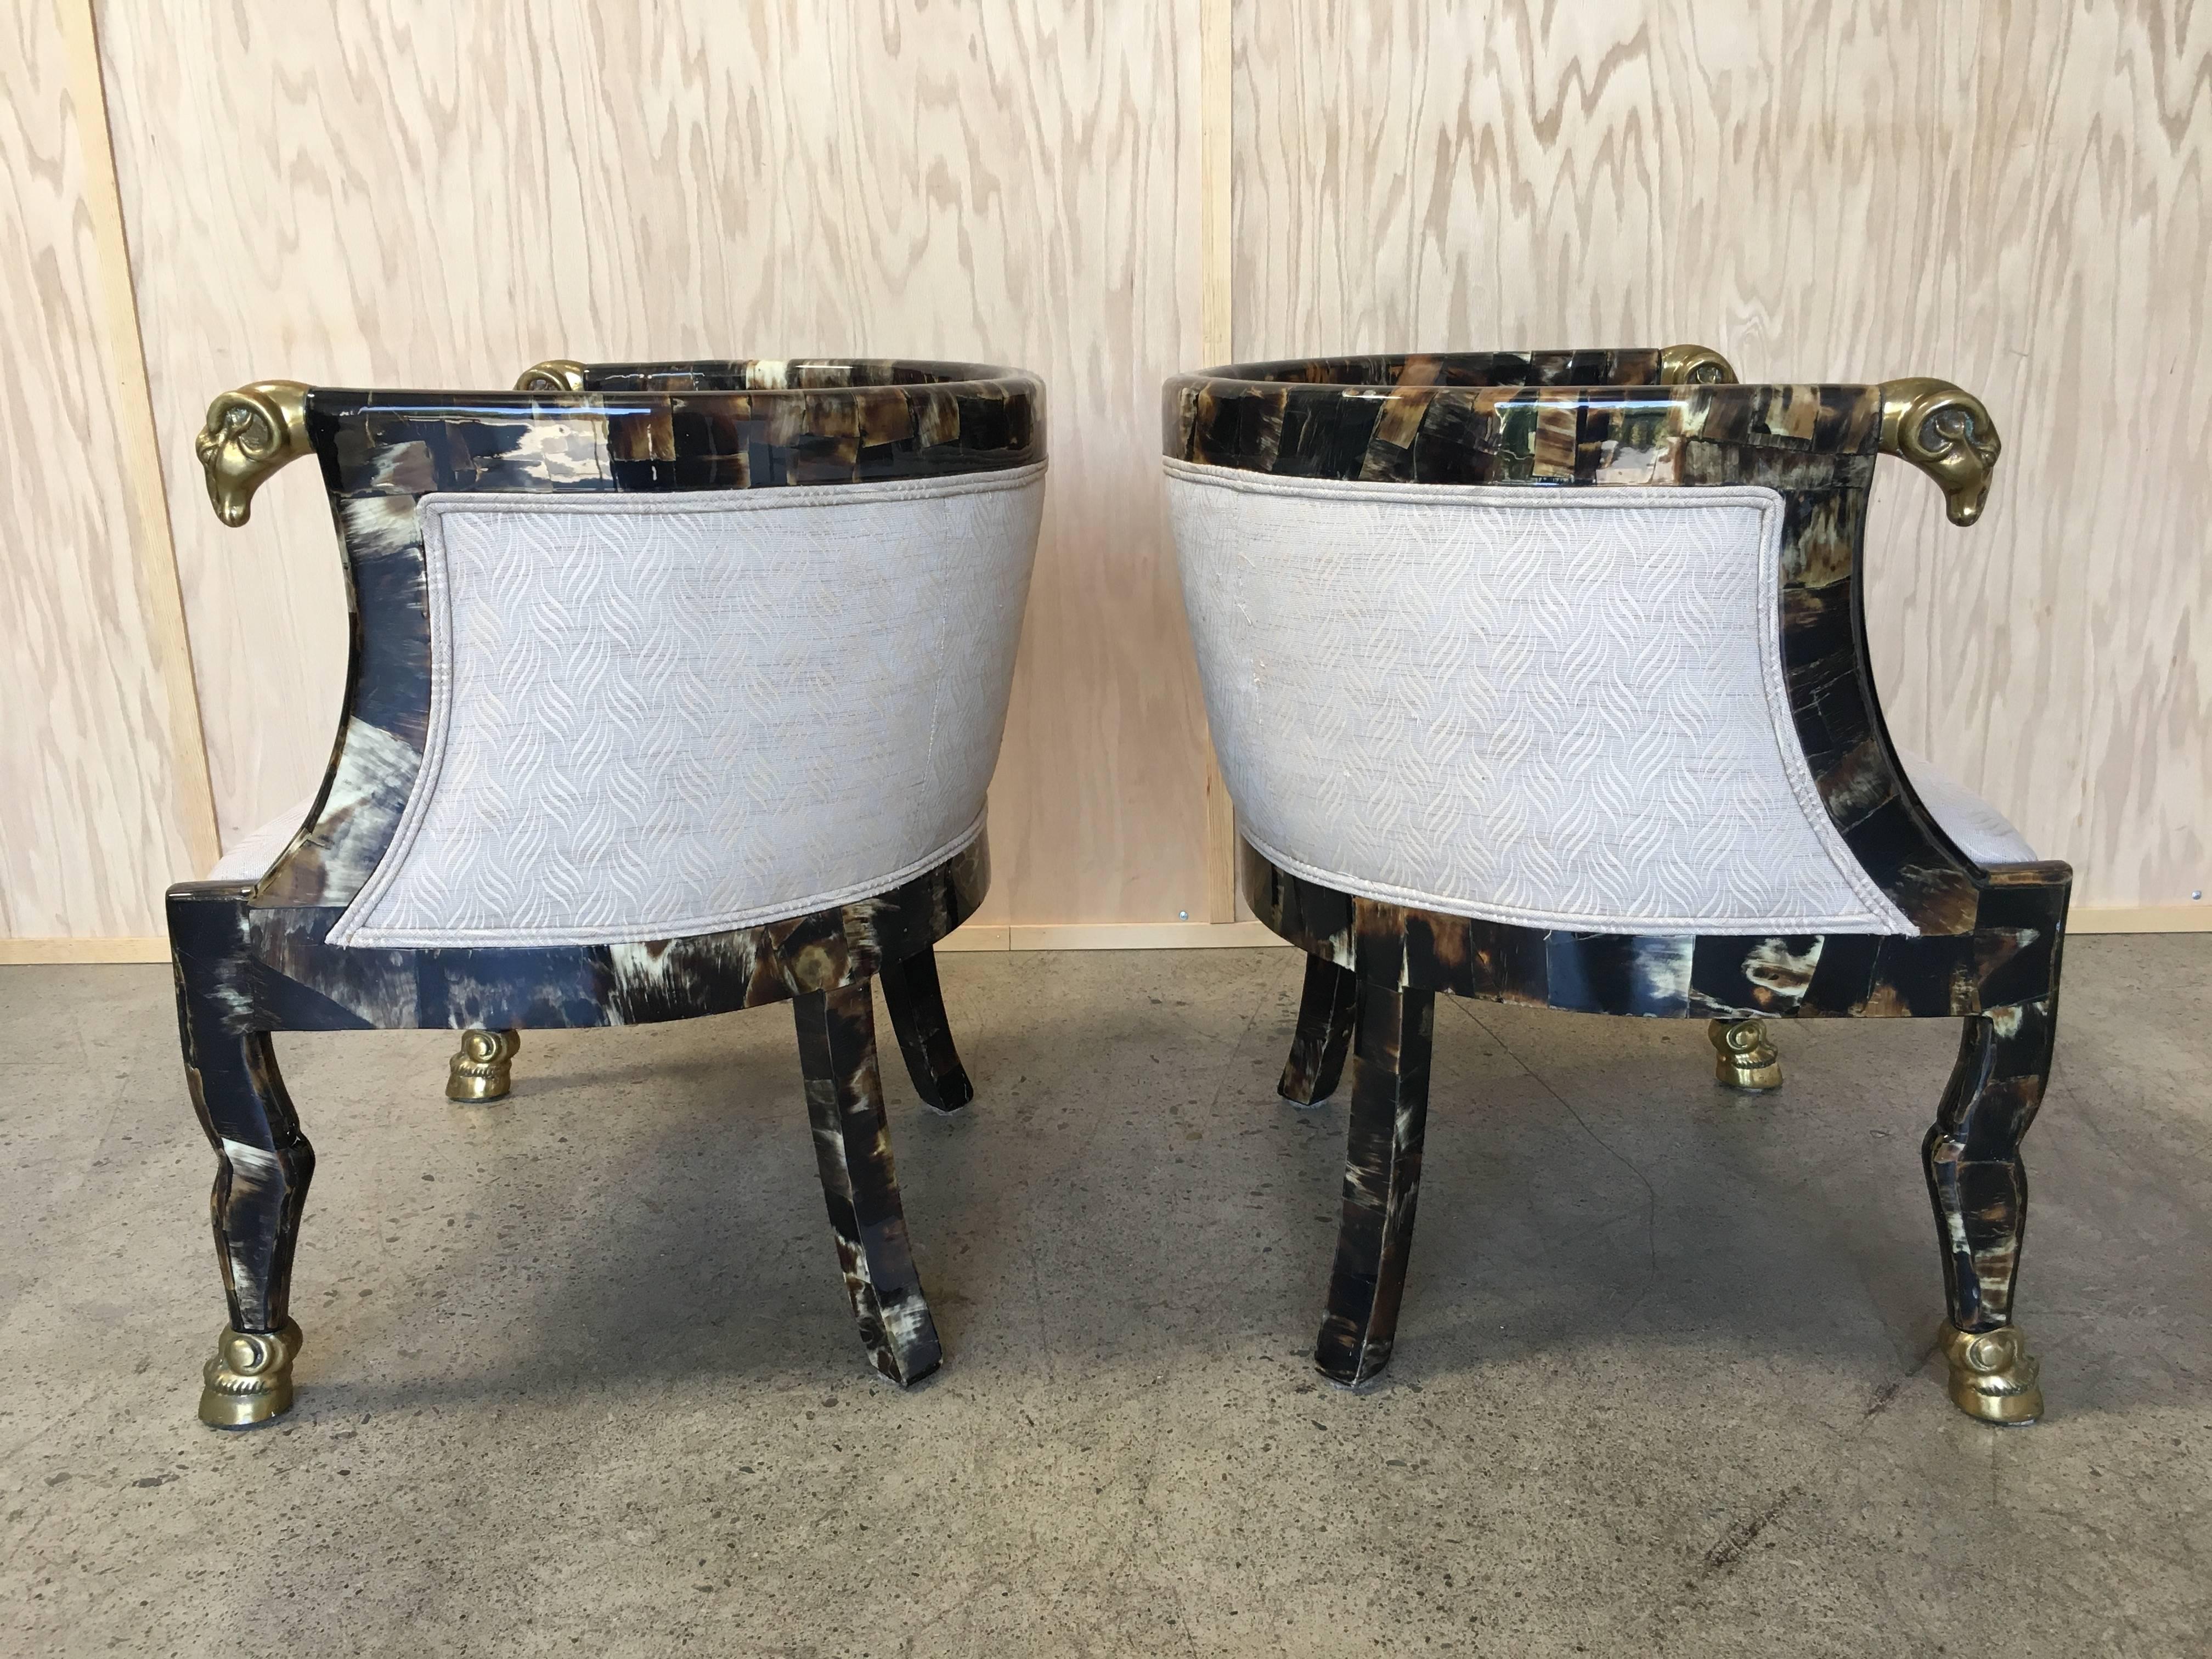 Pair of Steer Horn Covered Barrel Chairs with Brass Ram Heads 1